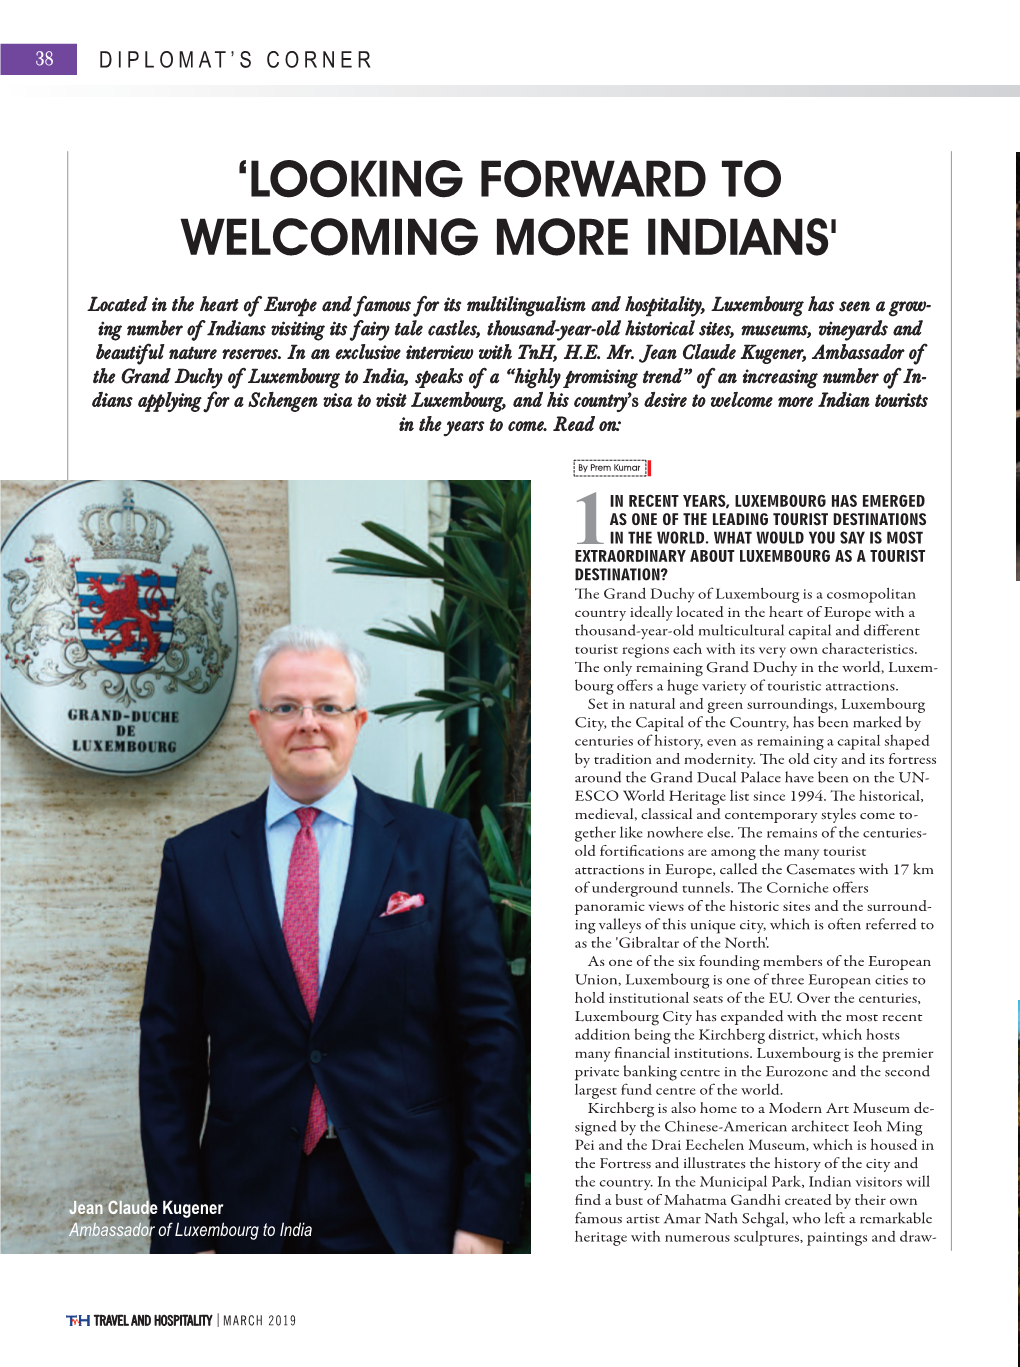 'Looking Forward to Welcoming More Indians'